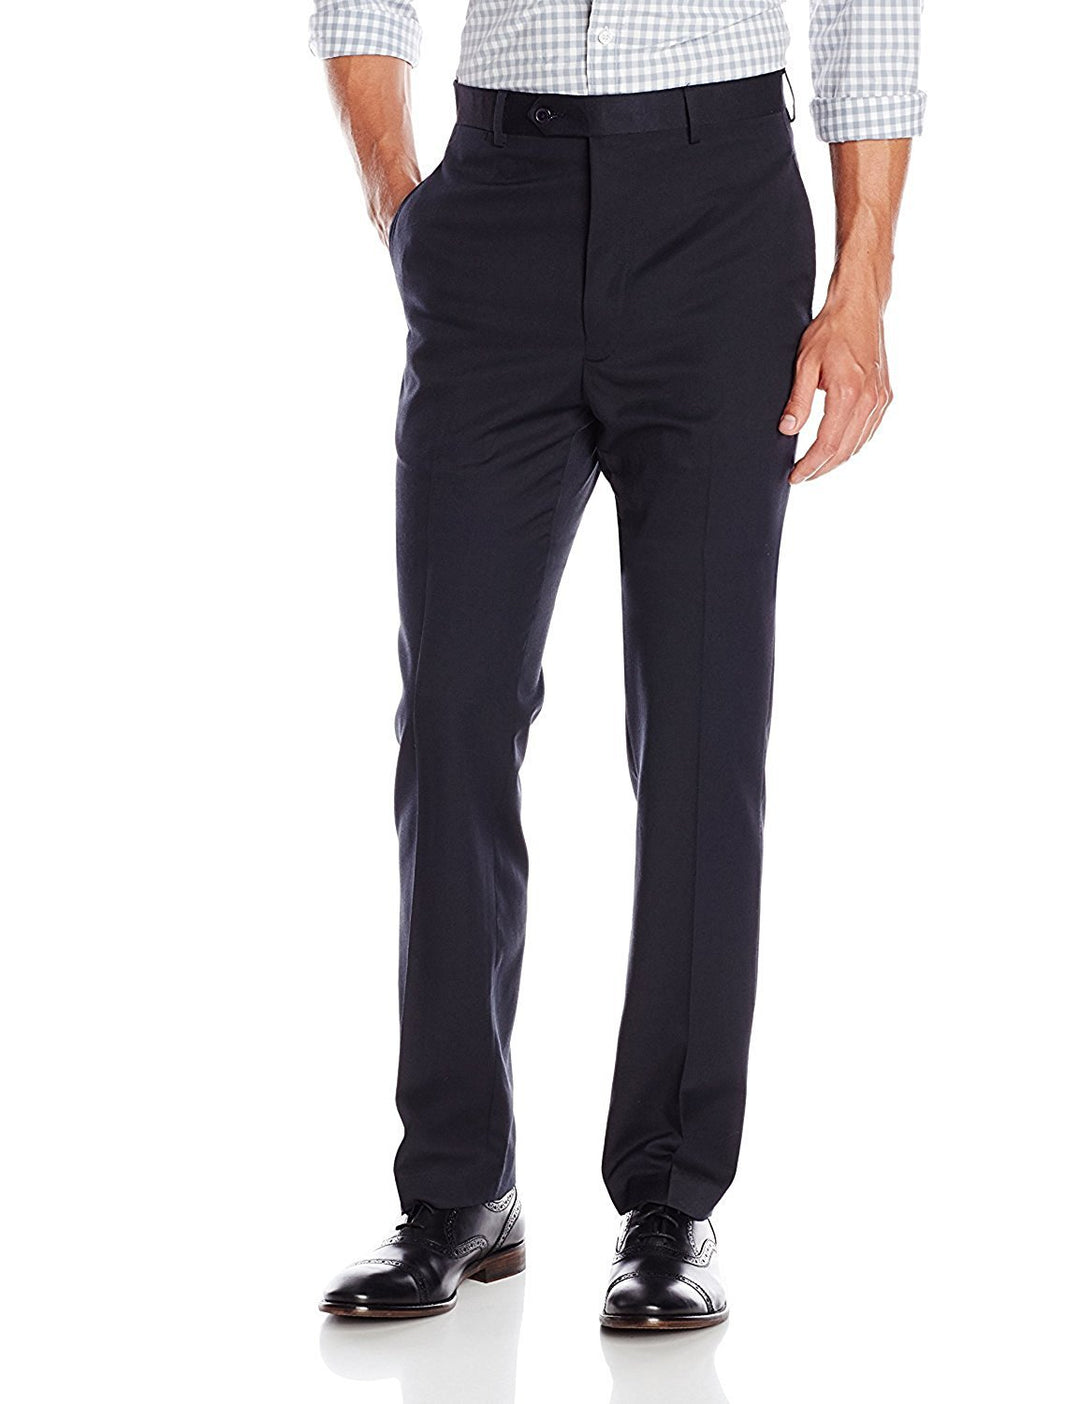 Giorgio Fiorelli Men's Modern Fit Flat Front Solid Dress Pants